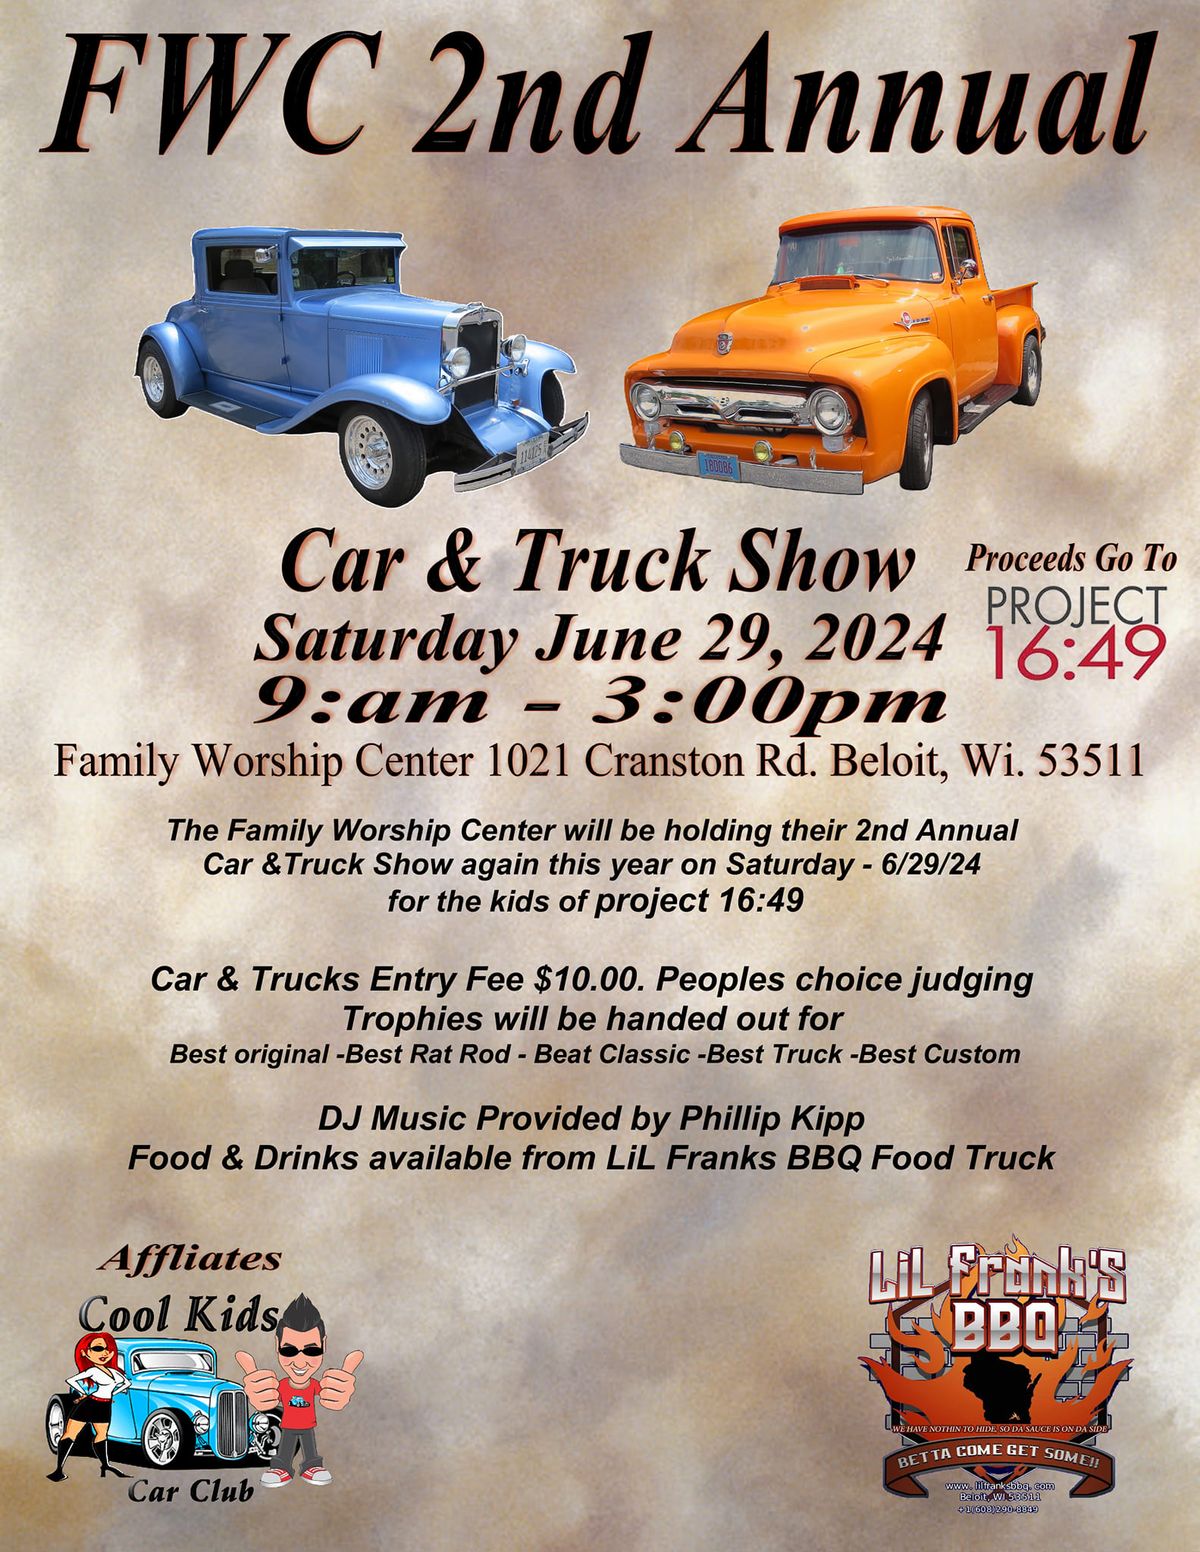 FWC 2nd annual car and truck show